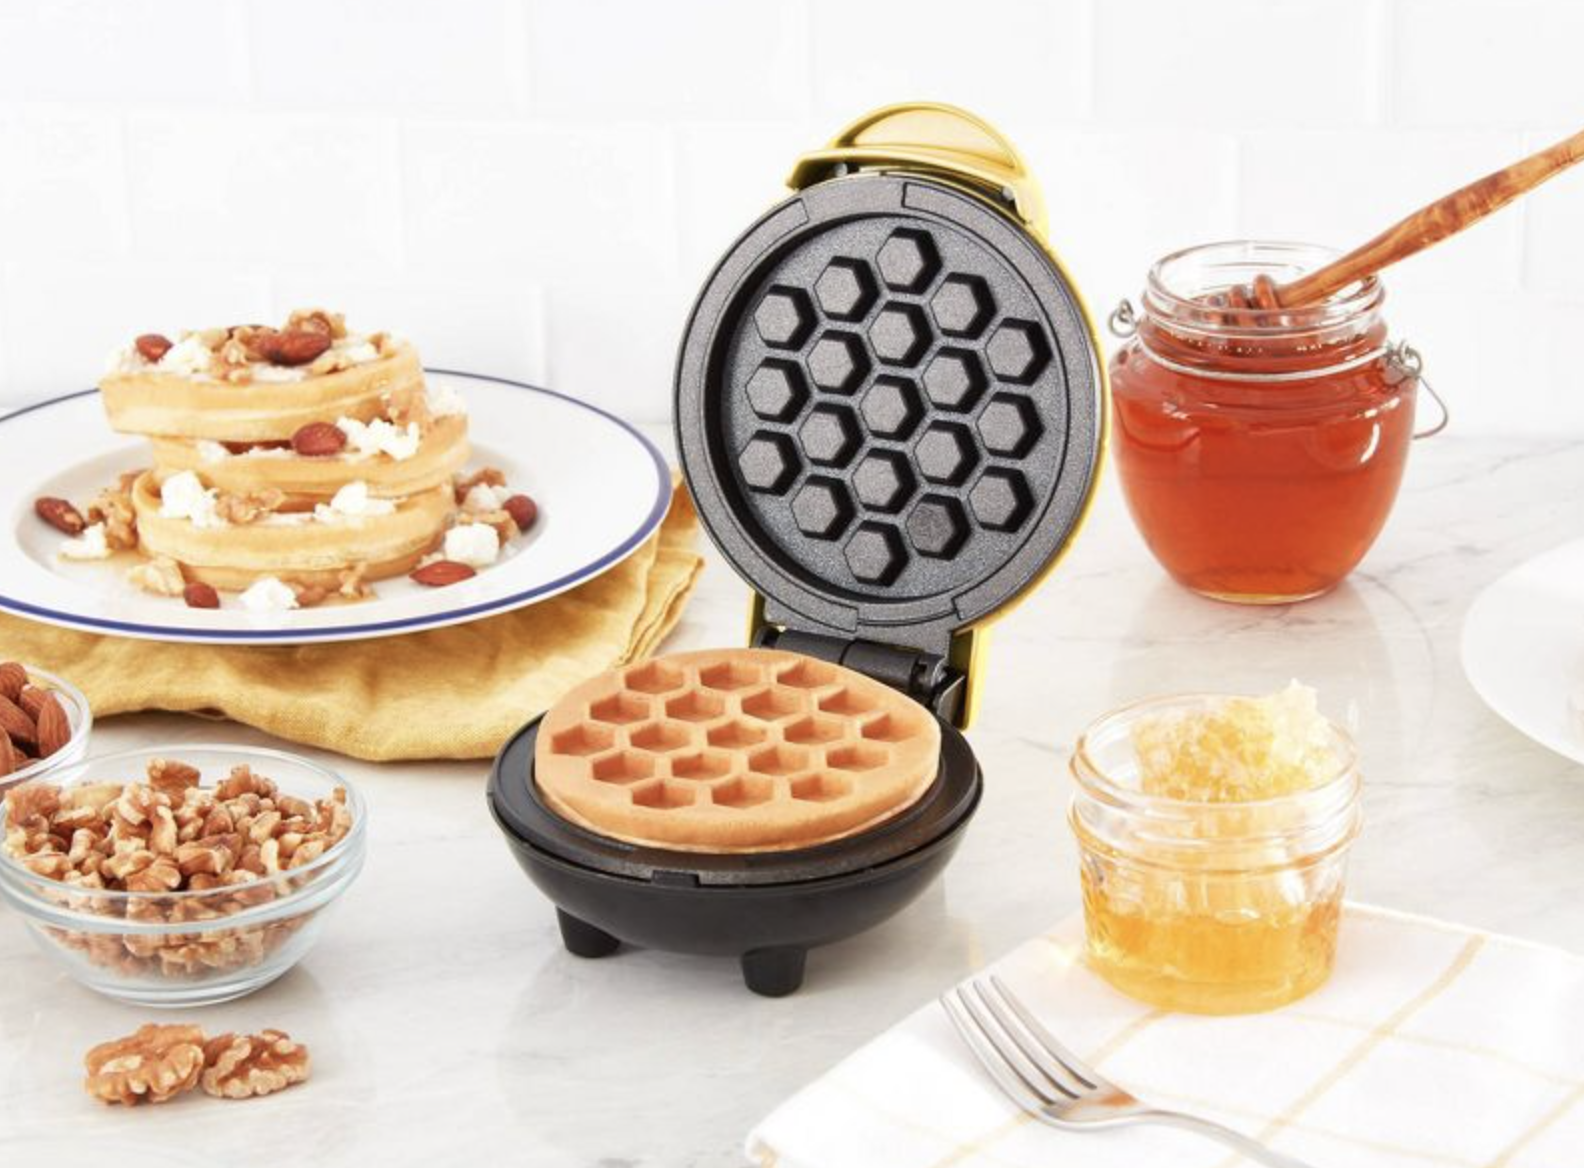 the waffle maker surrounded by honey and other waffles